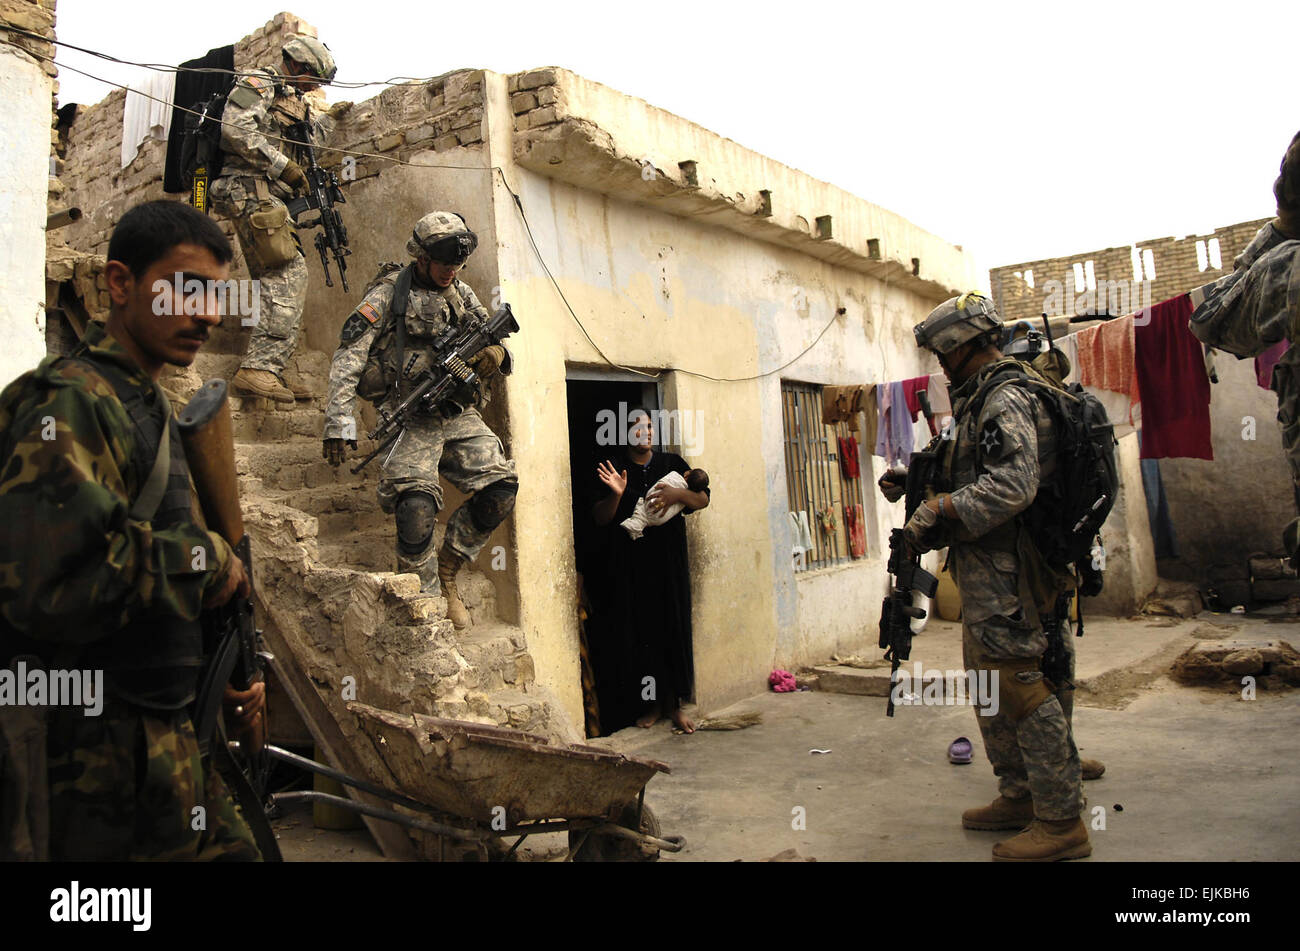 U.S. Army Soldiers search a house during a cordon and search for weapons caches and insurgents in Old Baqubah, Iraq, April 2, 2007. The Soldiers are from the 5th Battalion, 20th Infantry Regiment, 3rd Stryker Brigade Combat Team, 2nd Infantry Division.  Staff Sgt. Stacy L. Pearsall Stock Photo